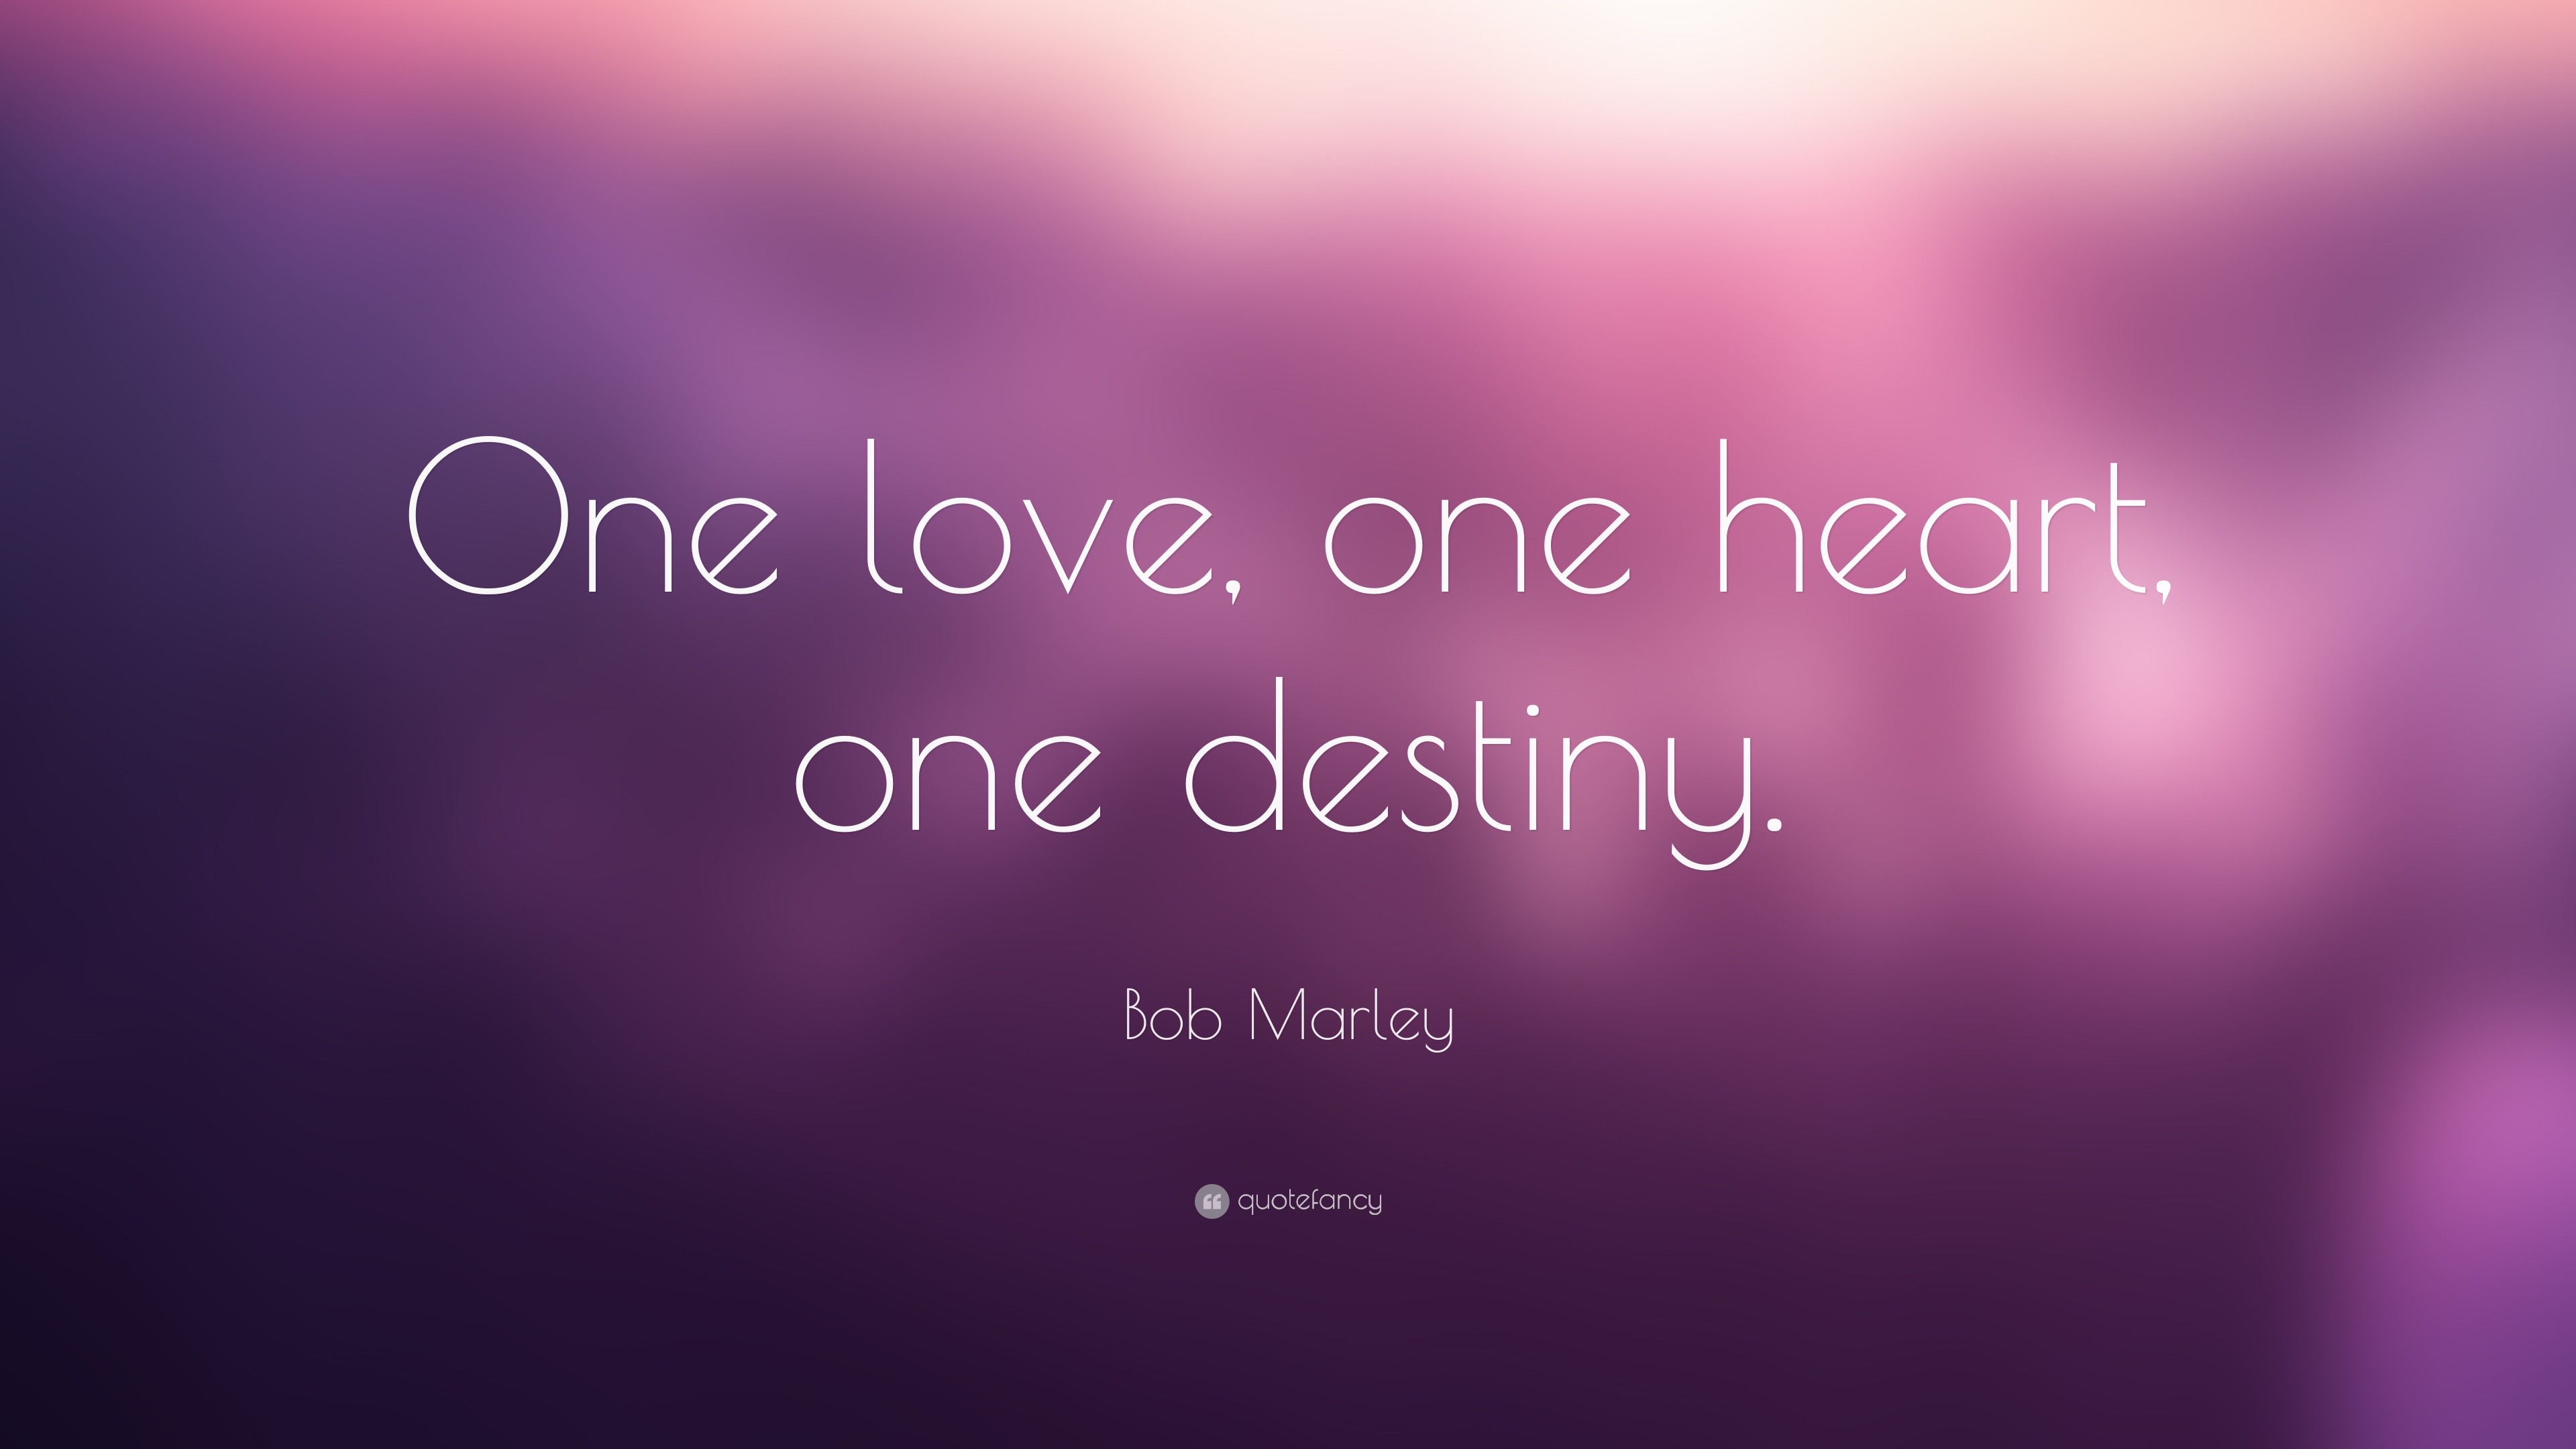 3840x2160 Bob Marley Quote: “One love, one heart, one destiny.”